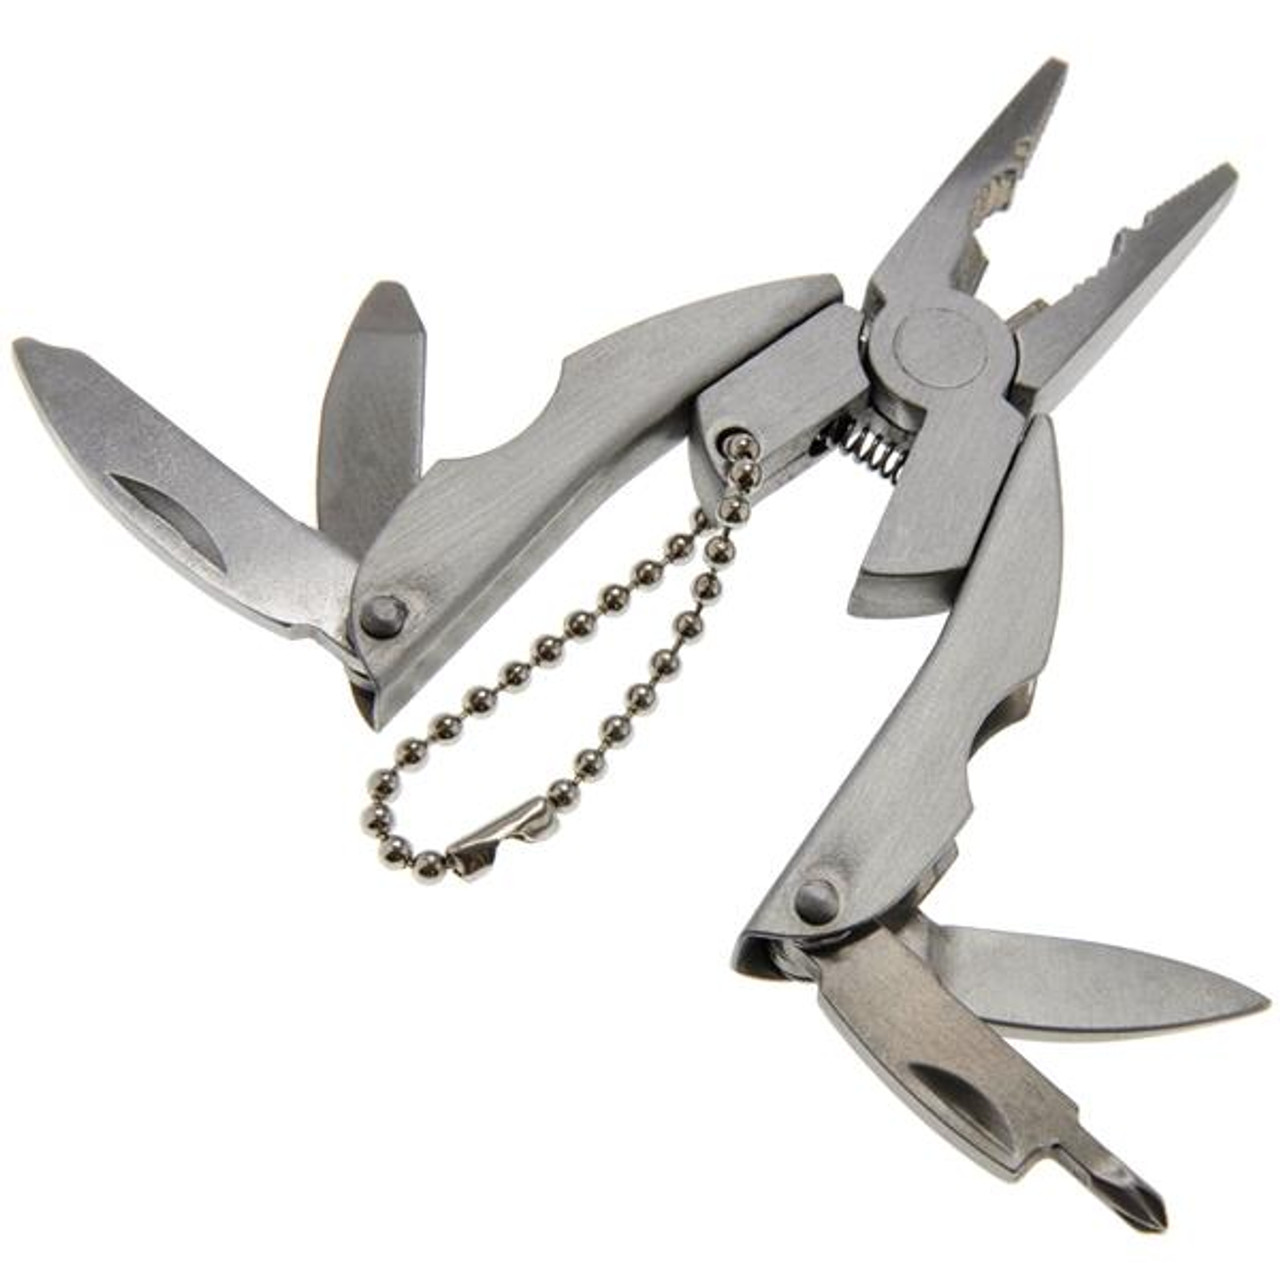 Shop for and Buy Multi-Tool Key Chain - SNAPPER at